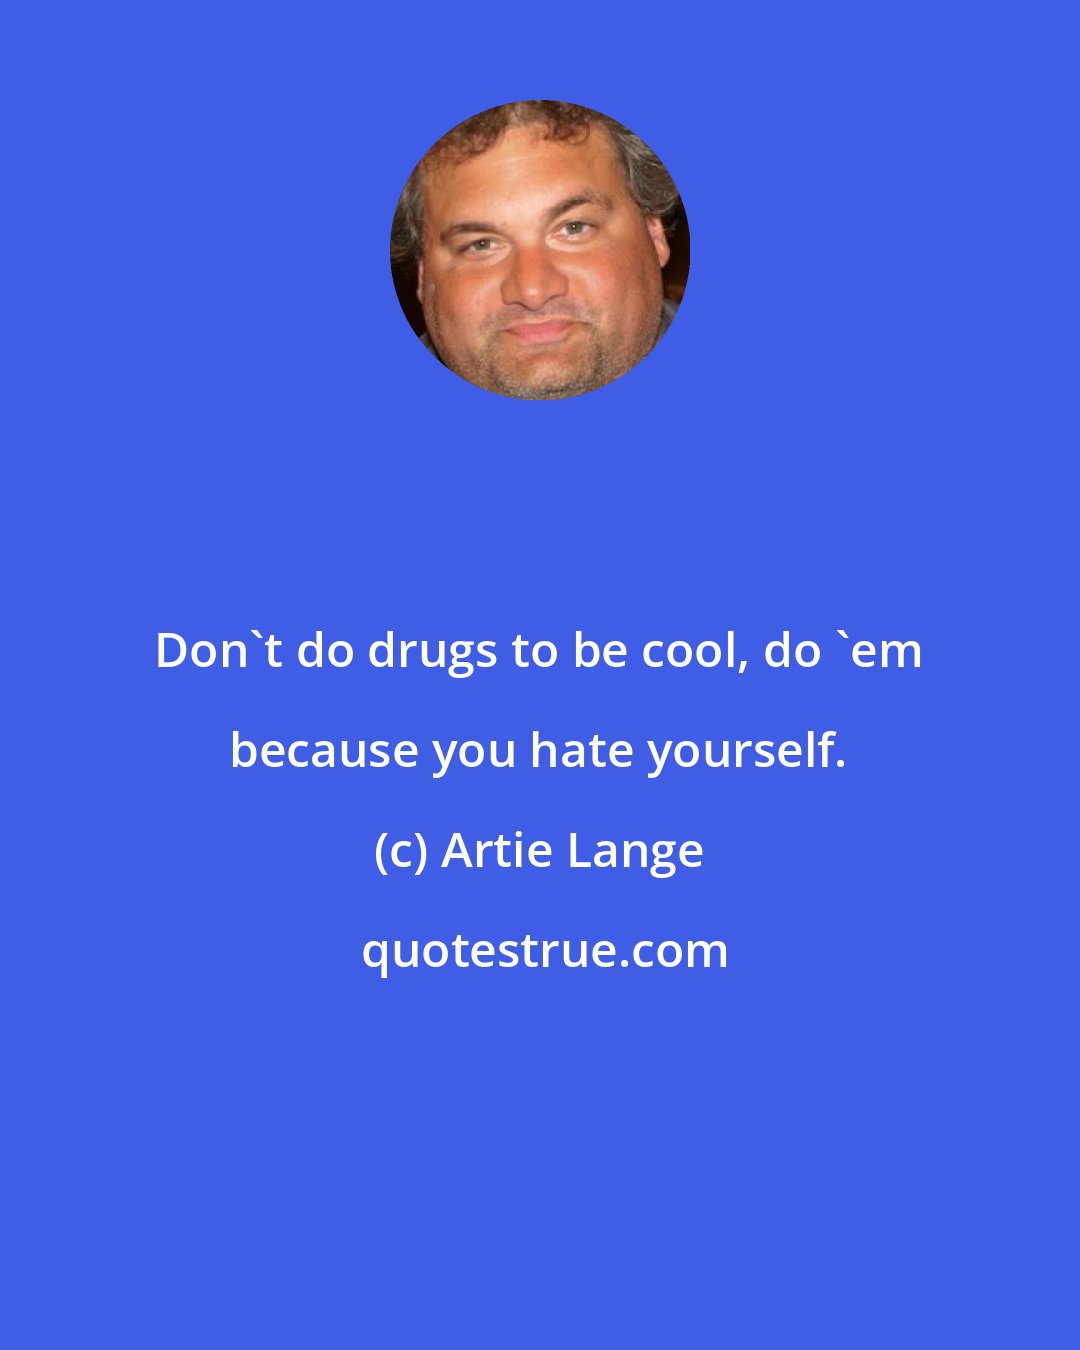 Artie Lange: Don't do drugs to be cool, do 'em because you hate yourself.